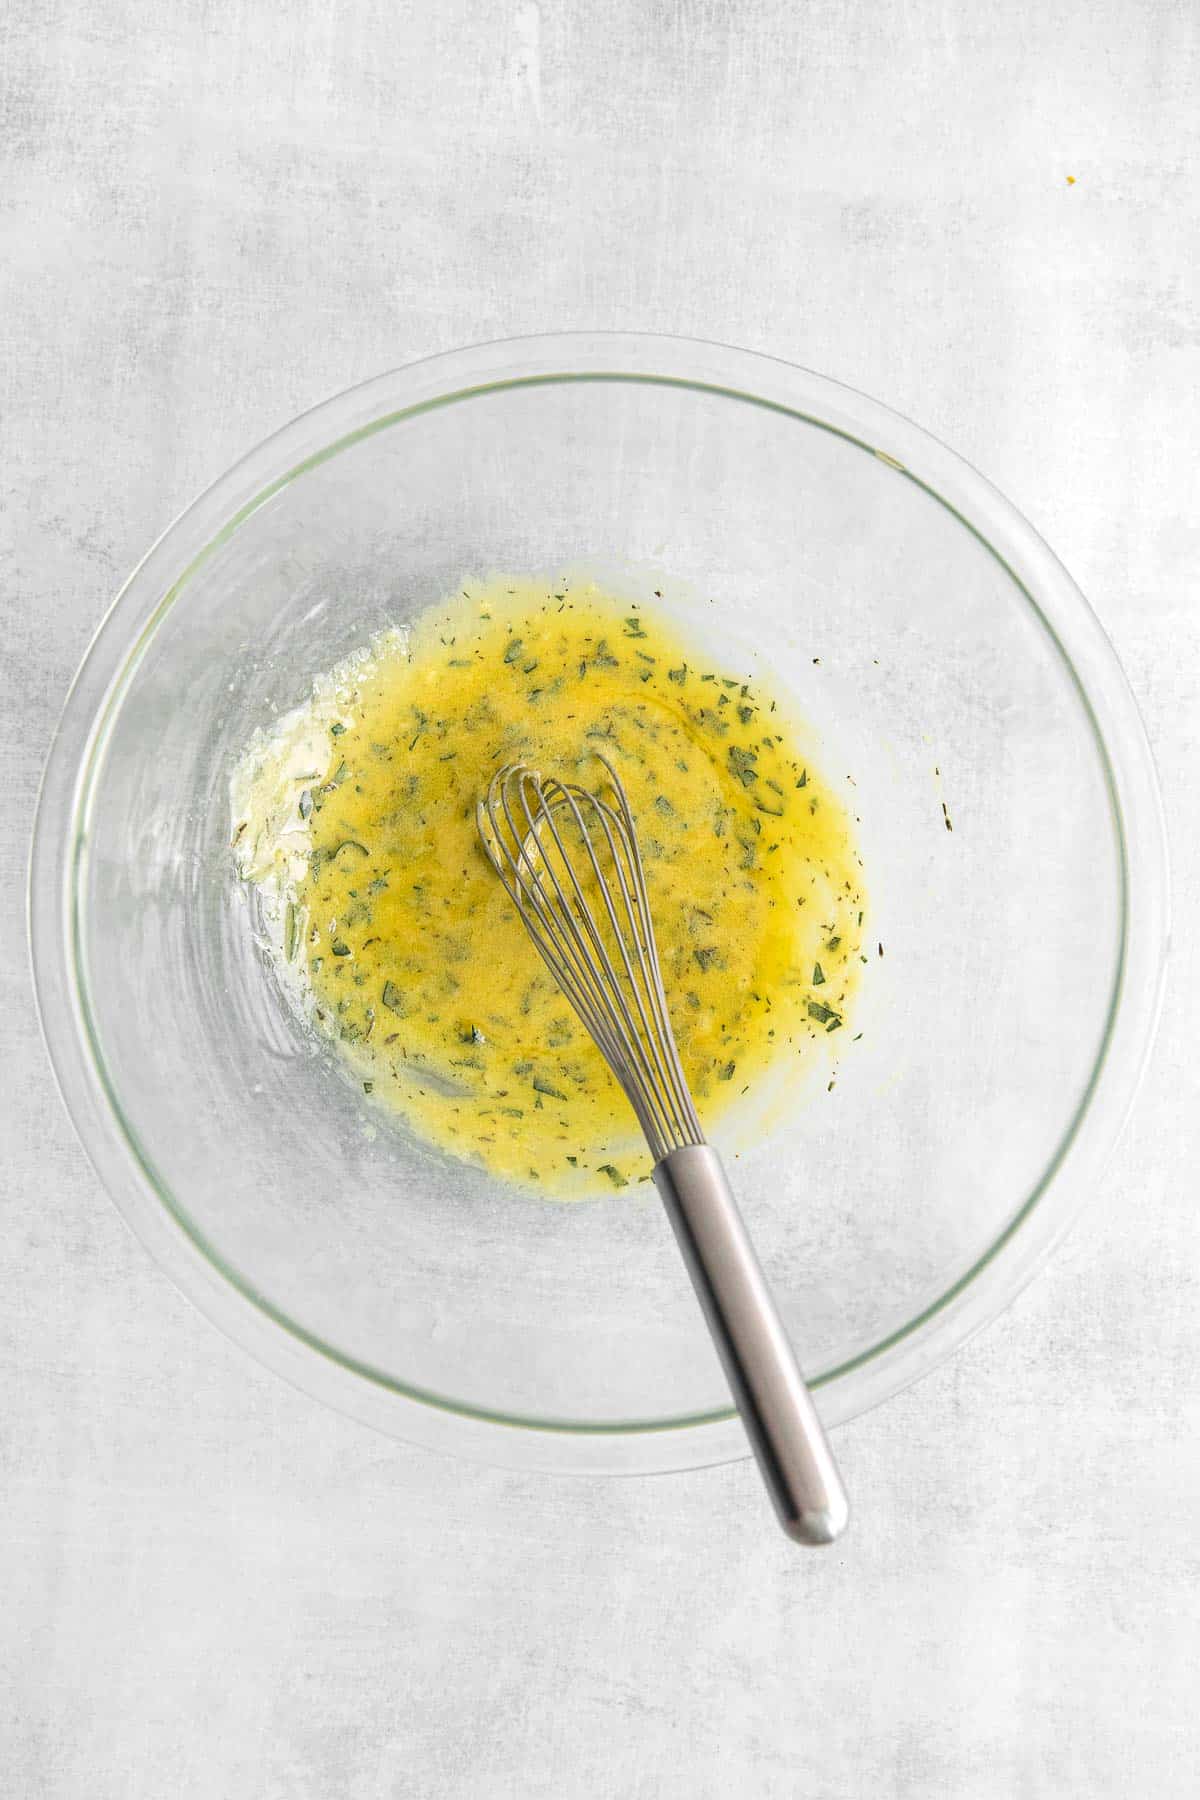 Olive oil mix in a large glass mixing bowl.